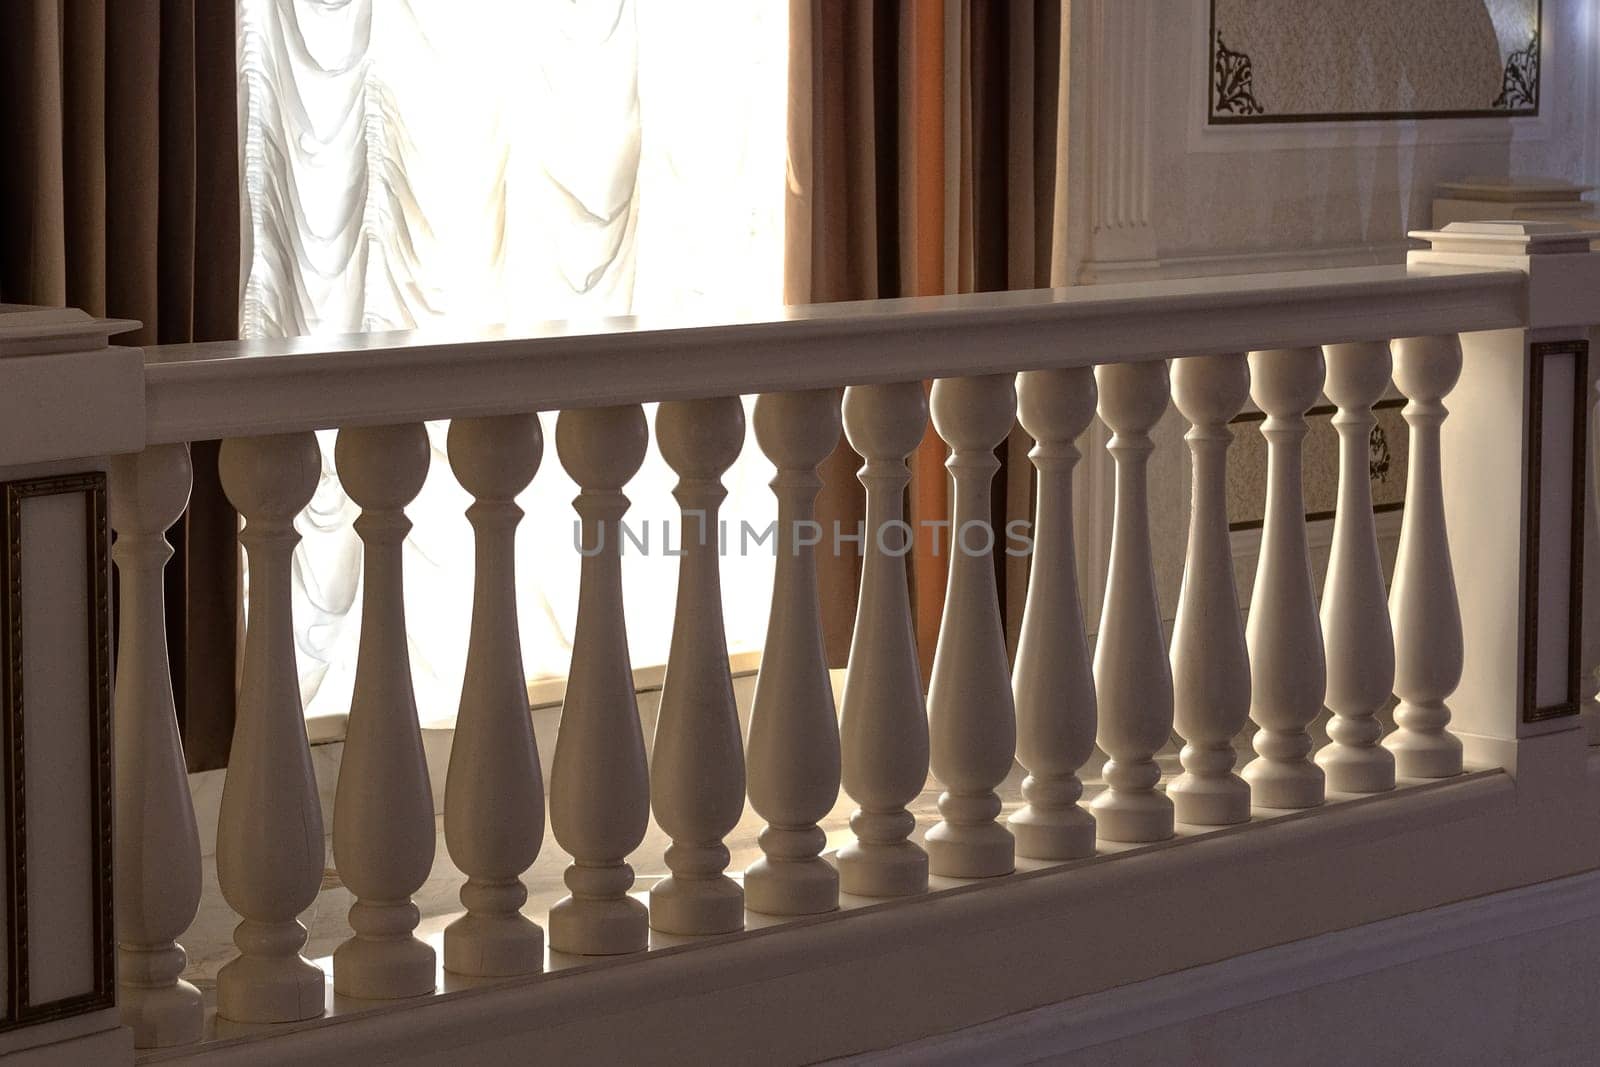 Fences made of stone railings with balusters in a classic interior.